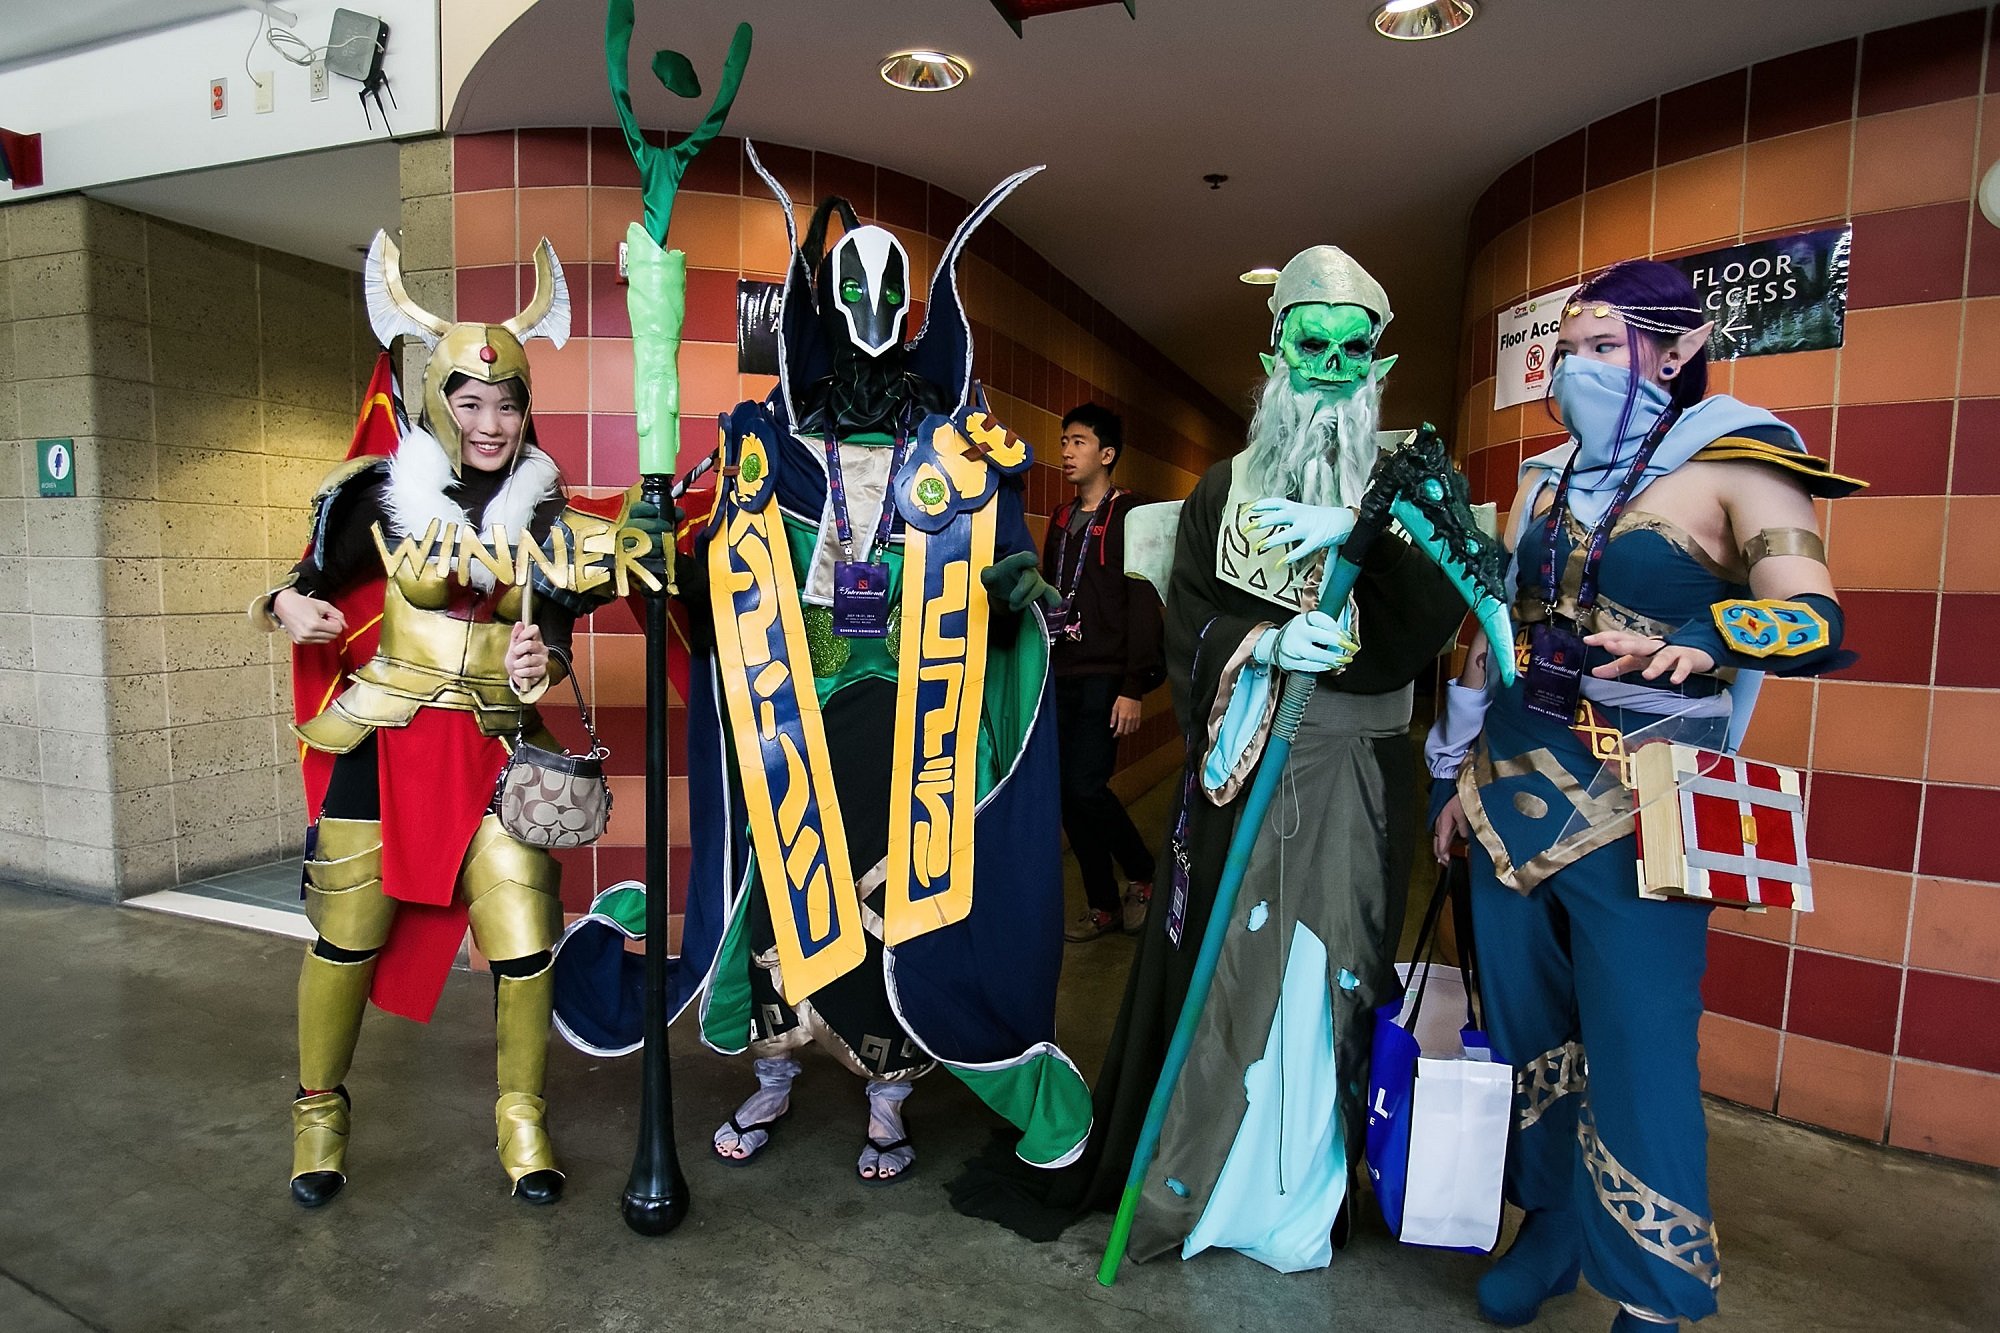 Fans dressed in cosplay pose for a photo at The International Dota 2 Championships on July 20, 2014 in Seattle, Washington.